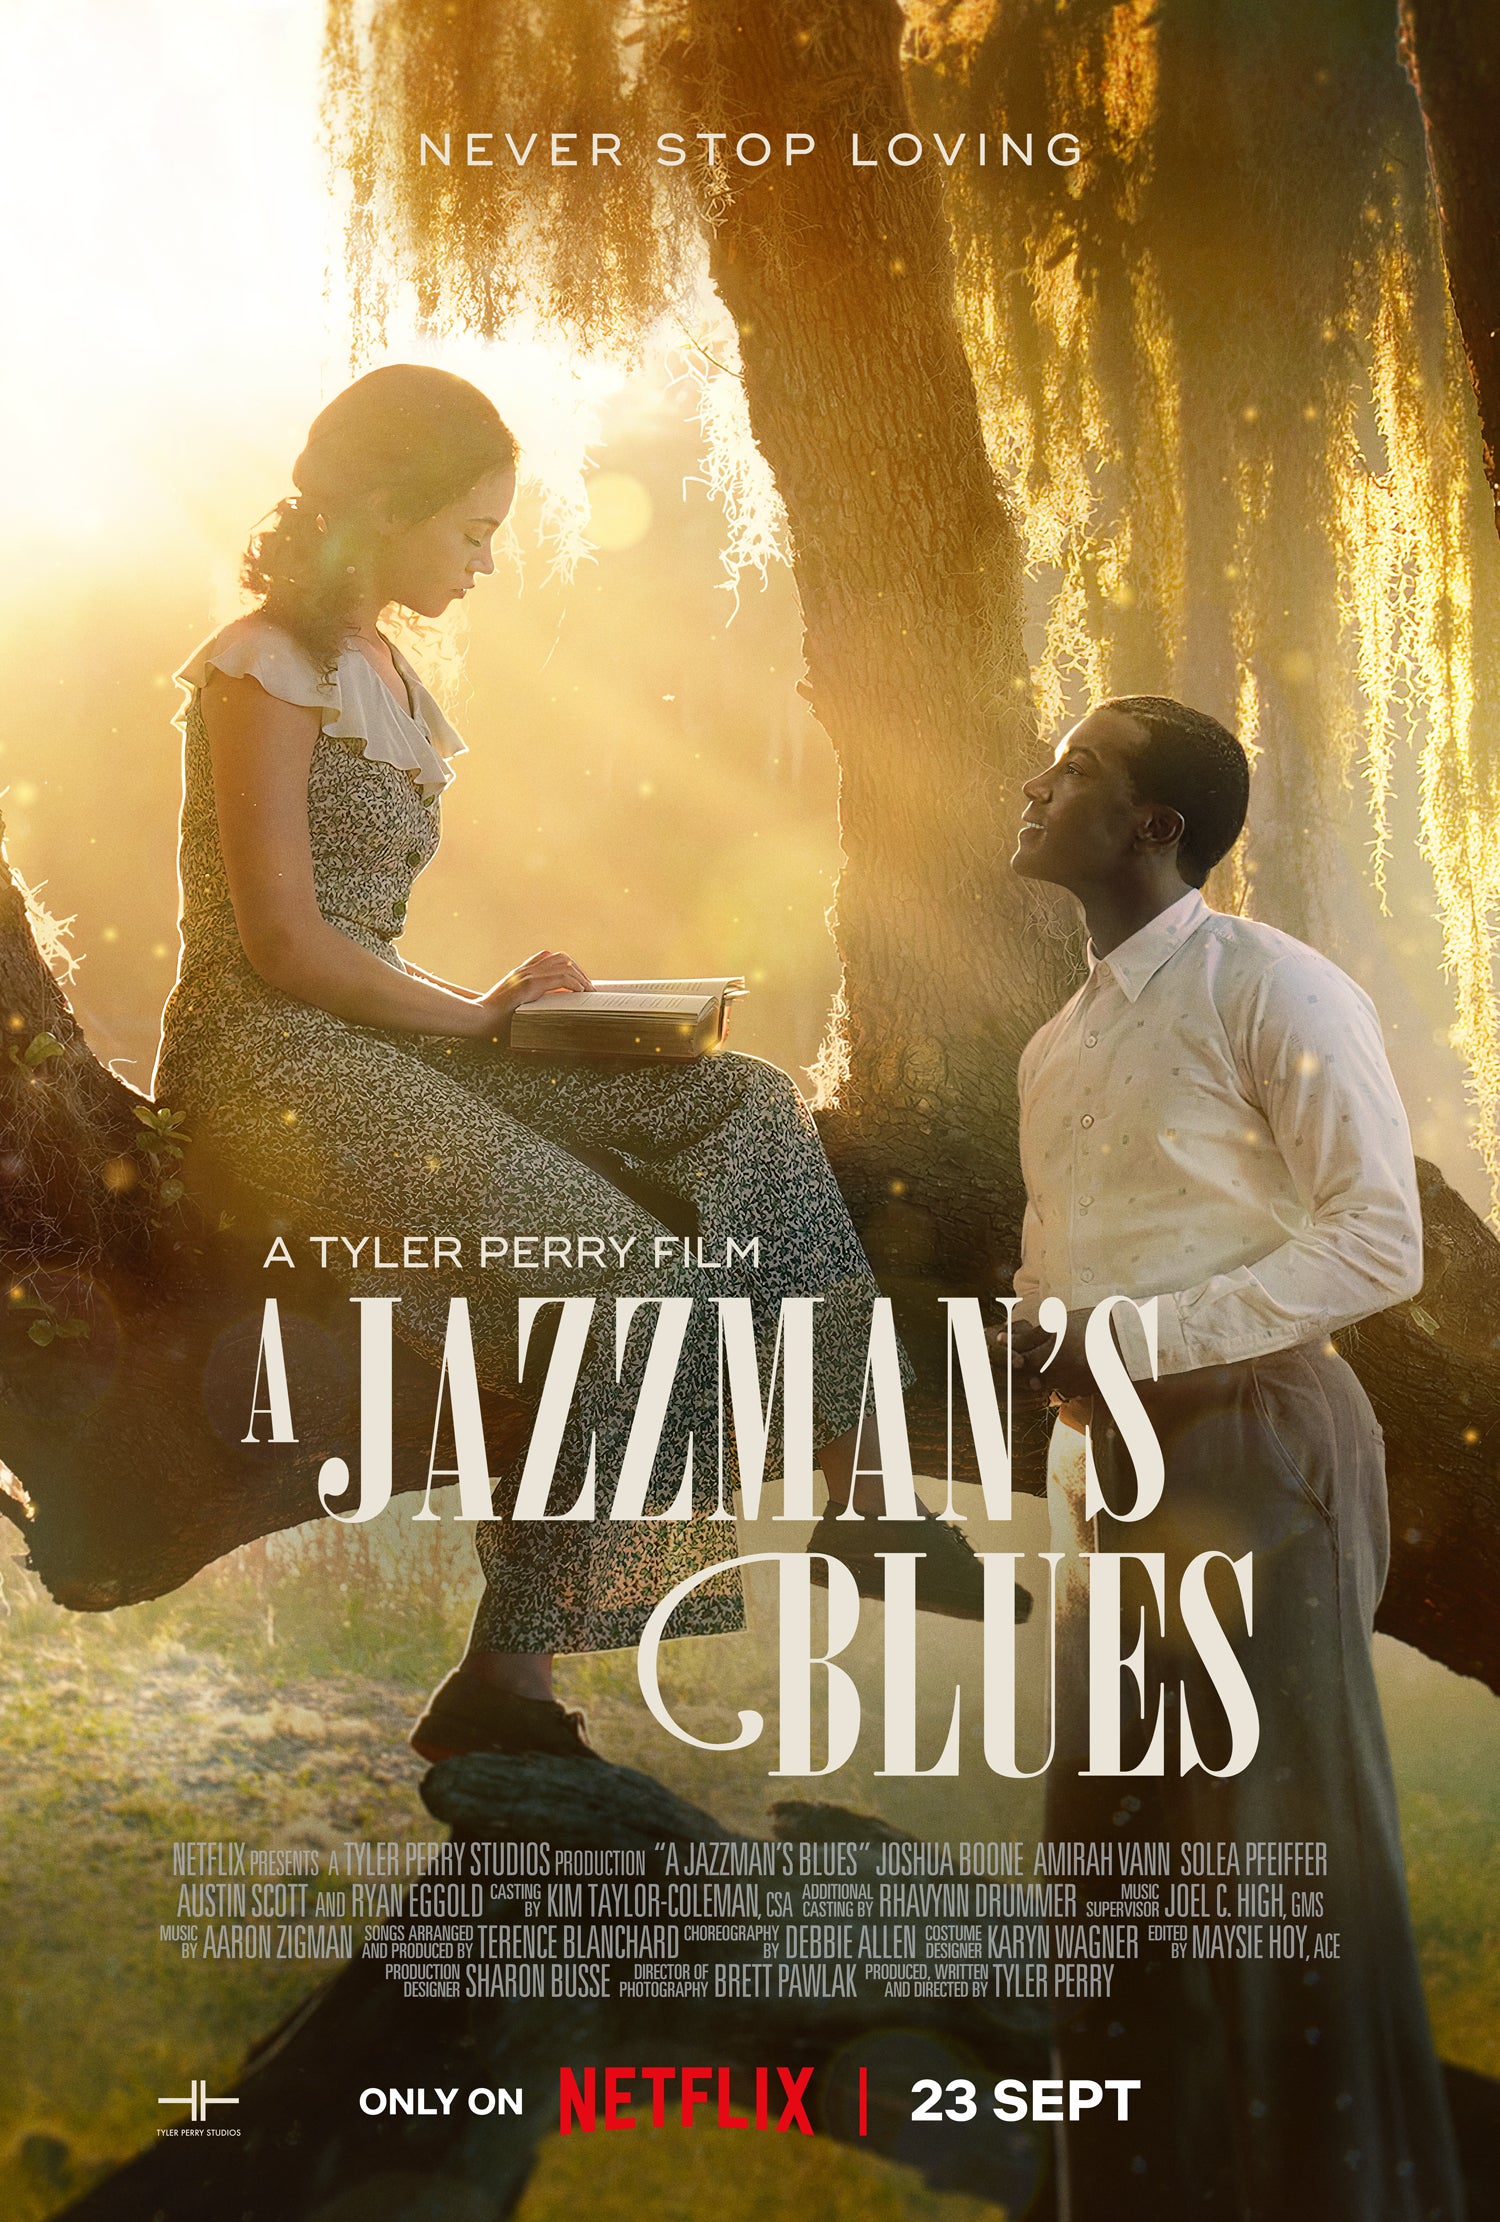 Watch: Netflix Releases The New Trailer For ‘A Jazzman’s Blues’